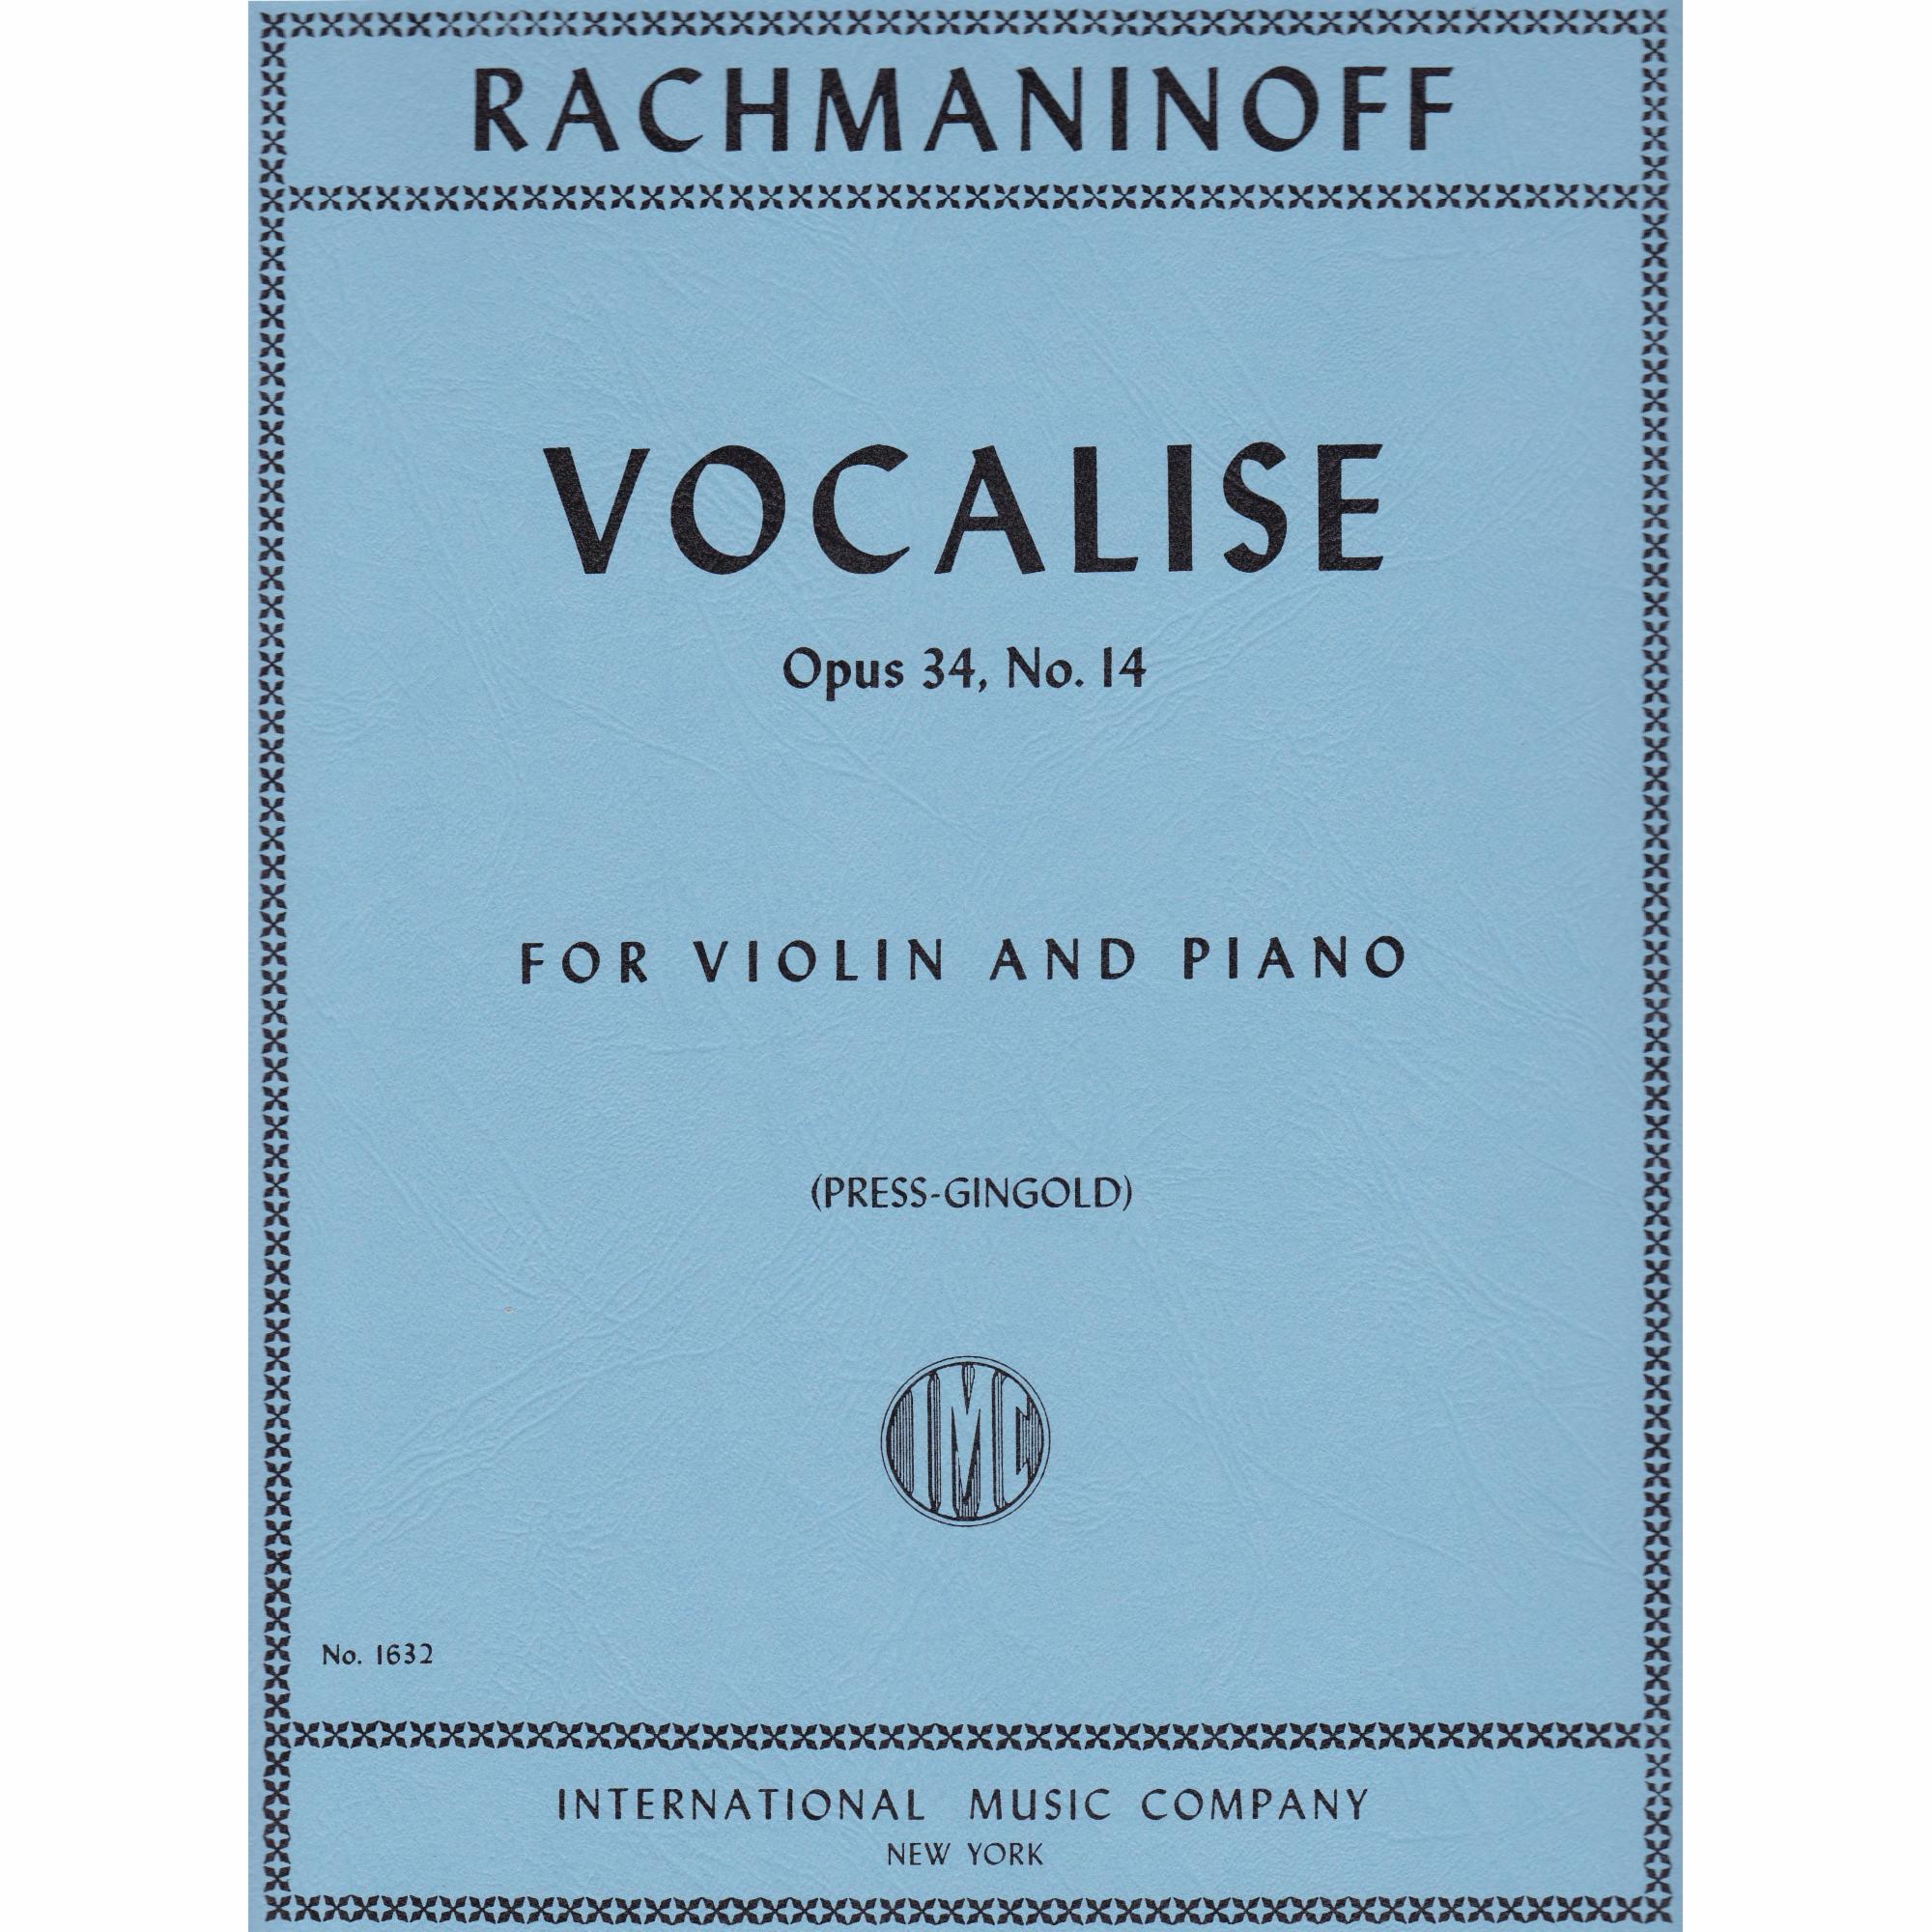 Rachmaninoff -- Vocalise, Op. 34, No. 14 for Violin and Piano